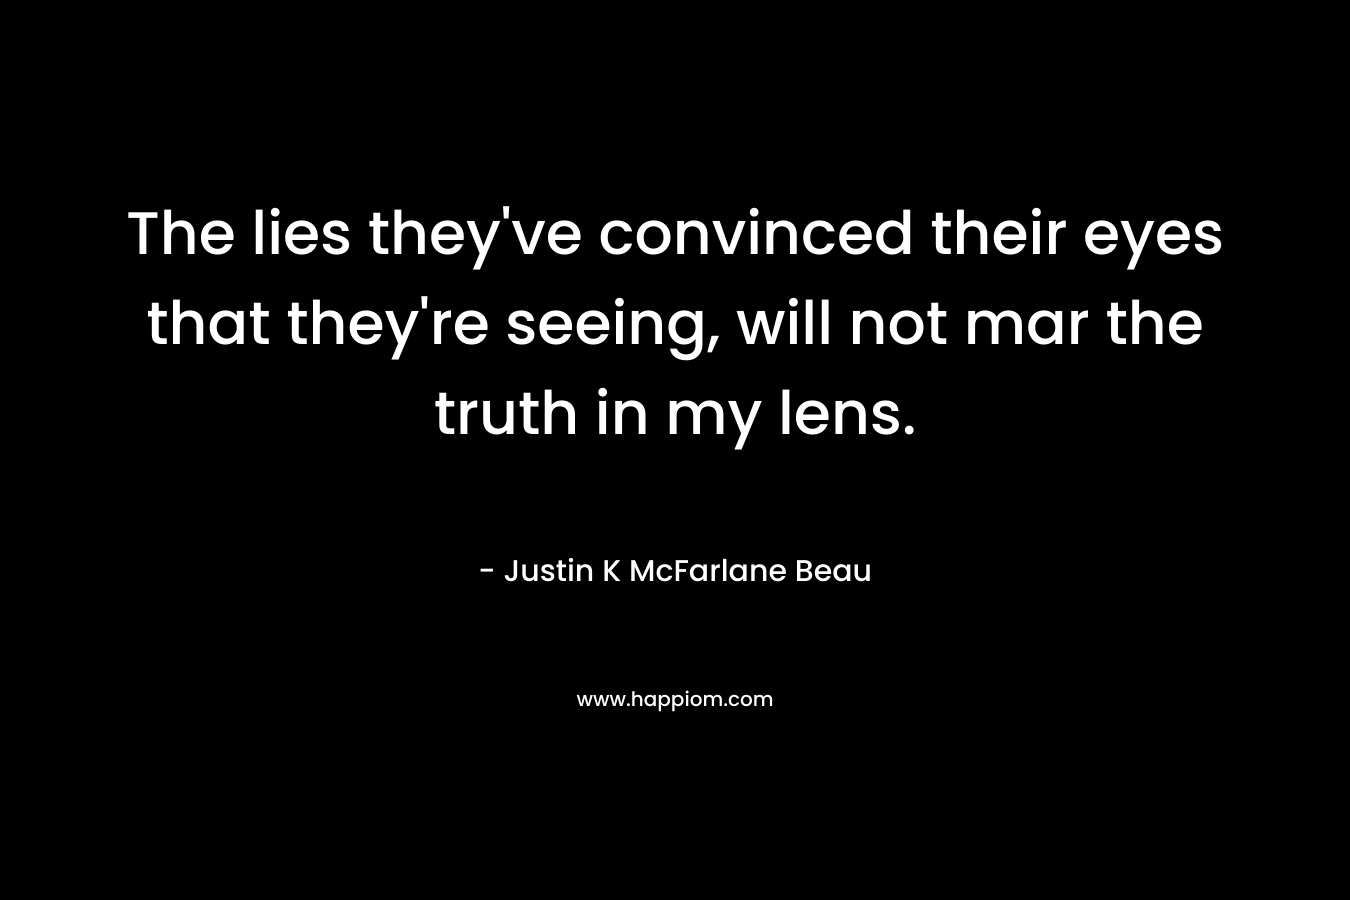 The lies they've convinced their eyes that they're seeing, will not mar the truth in my lens.